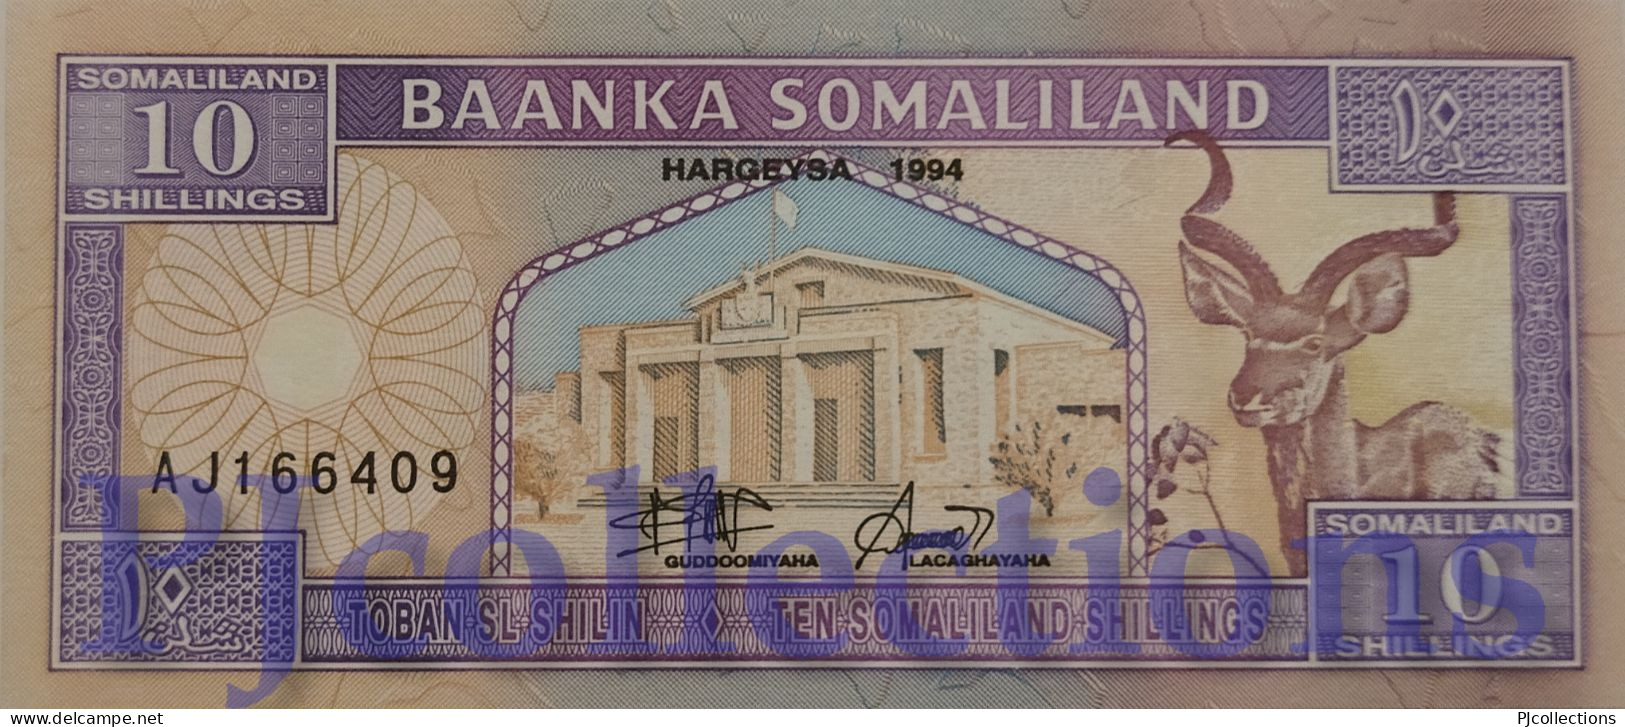 SOMALILAND 10 SHILLINGS 1994 PICK 2a UNC - Other - Africa